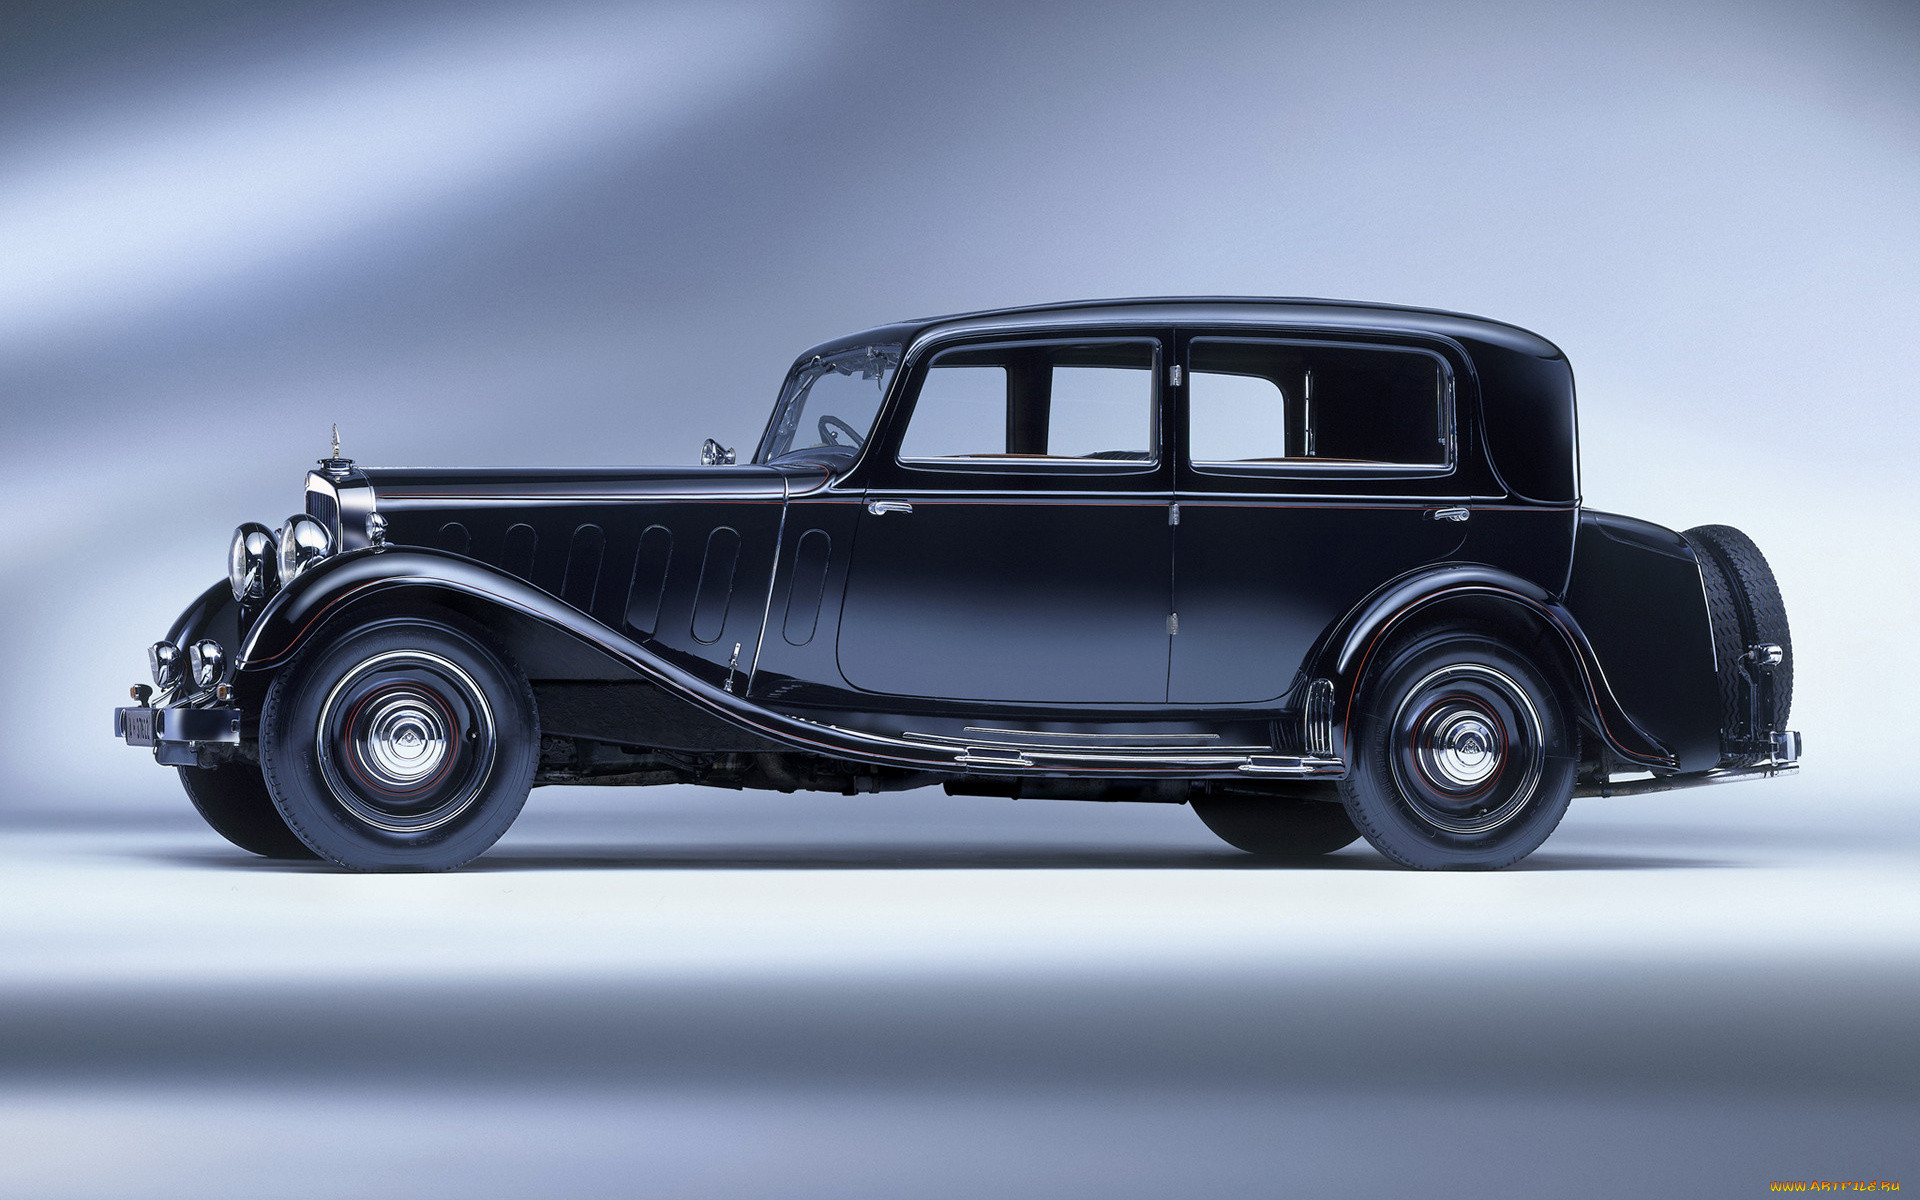 maybach zeppelin ds7 luxury limousine 1928, , , maybach, luxury, ds7, zeppelin, 1928, limousine